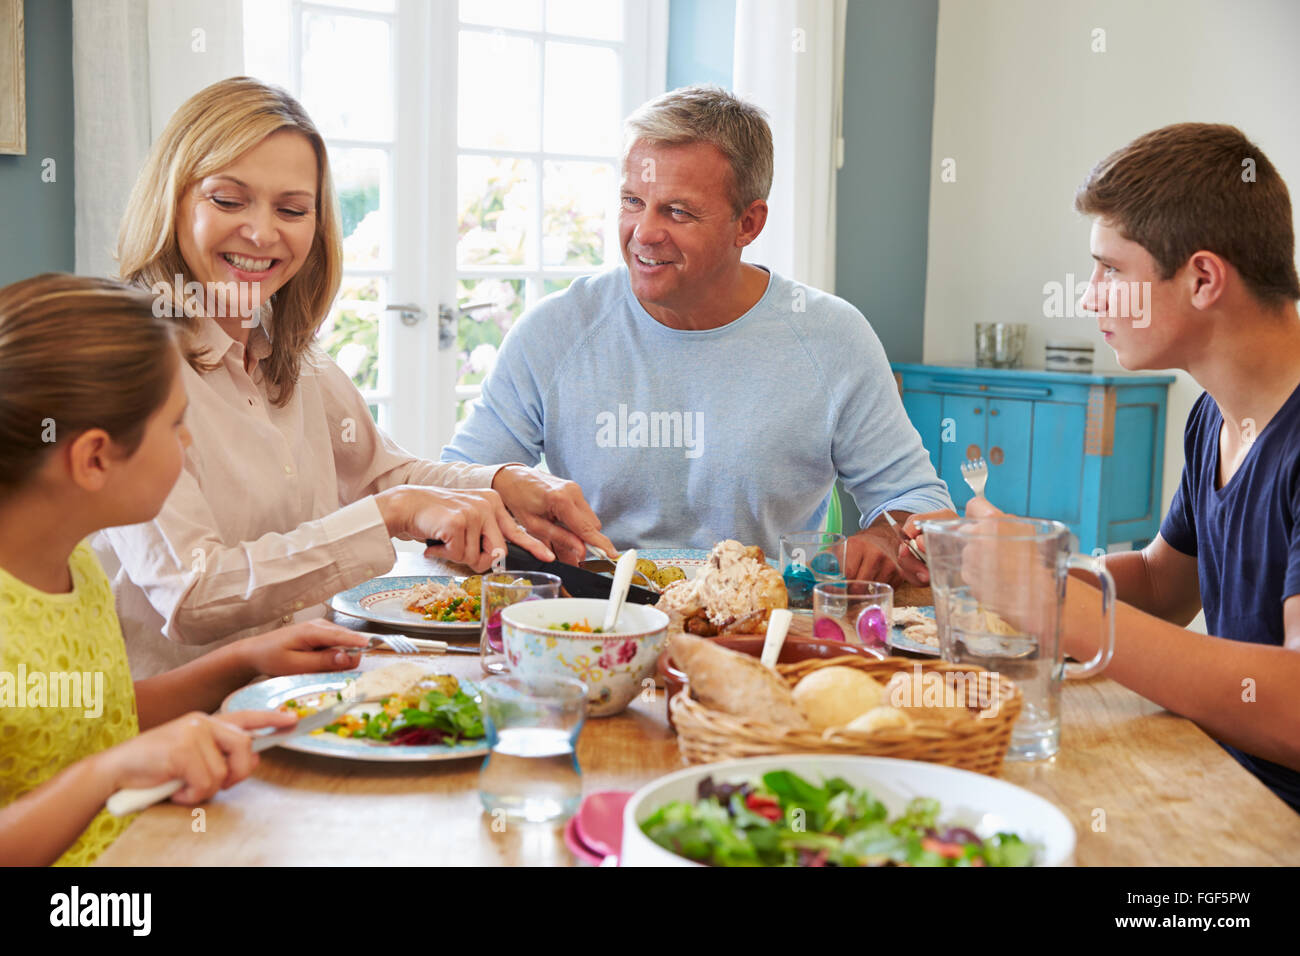 Family Enjoying Meal At Home Together Banque D'Images